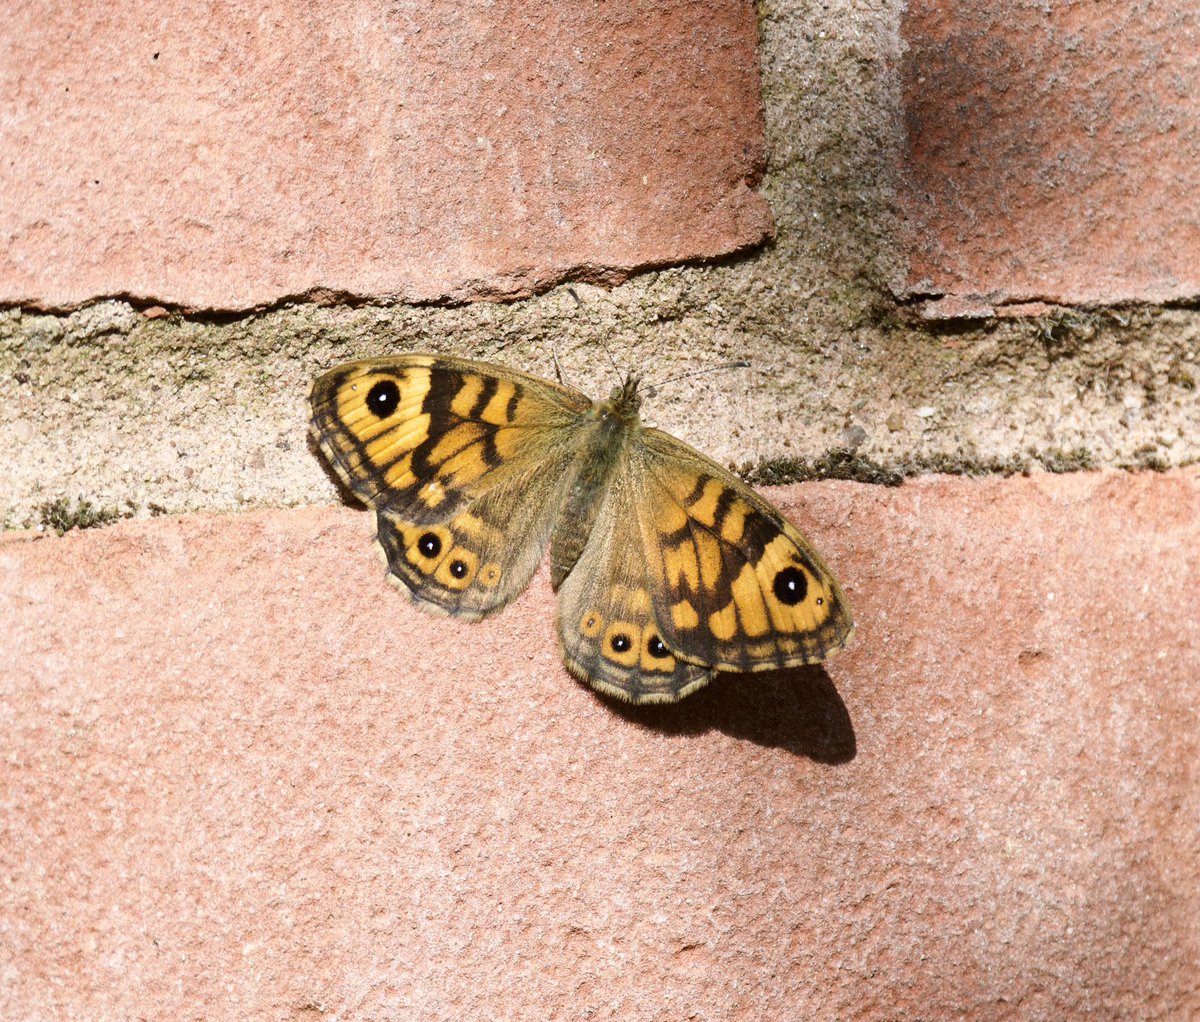 Just had a lovely #Wall butterfly on the wall in the garden 😁#Shutterton #Dawlish